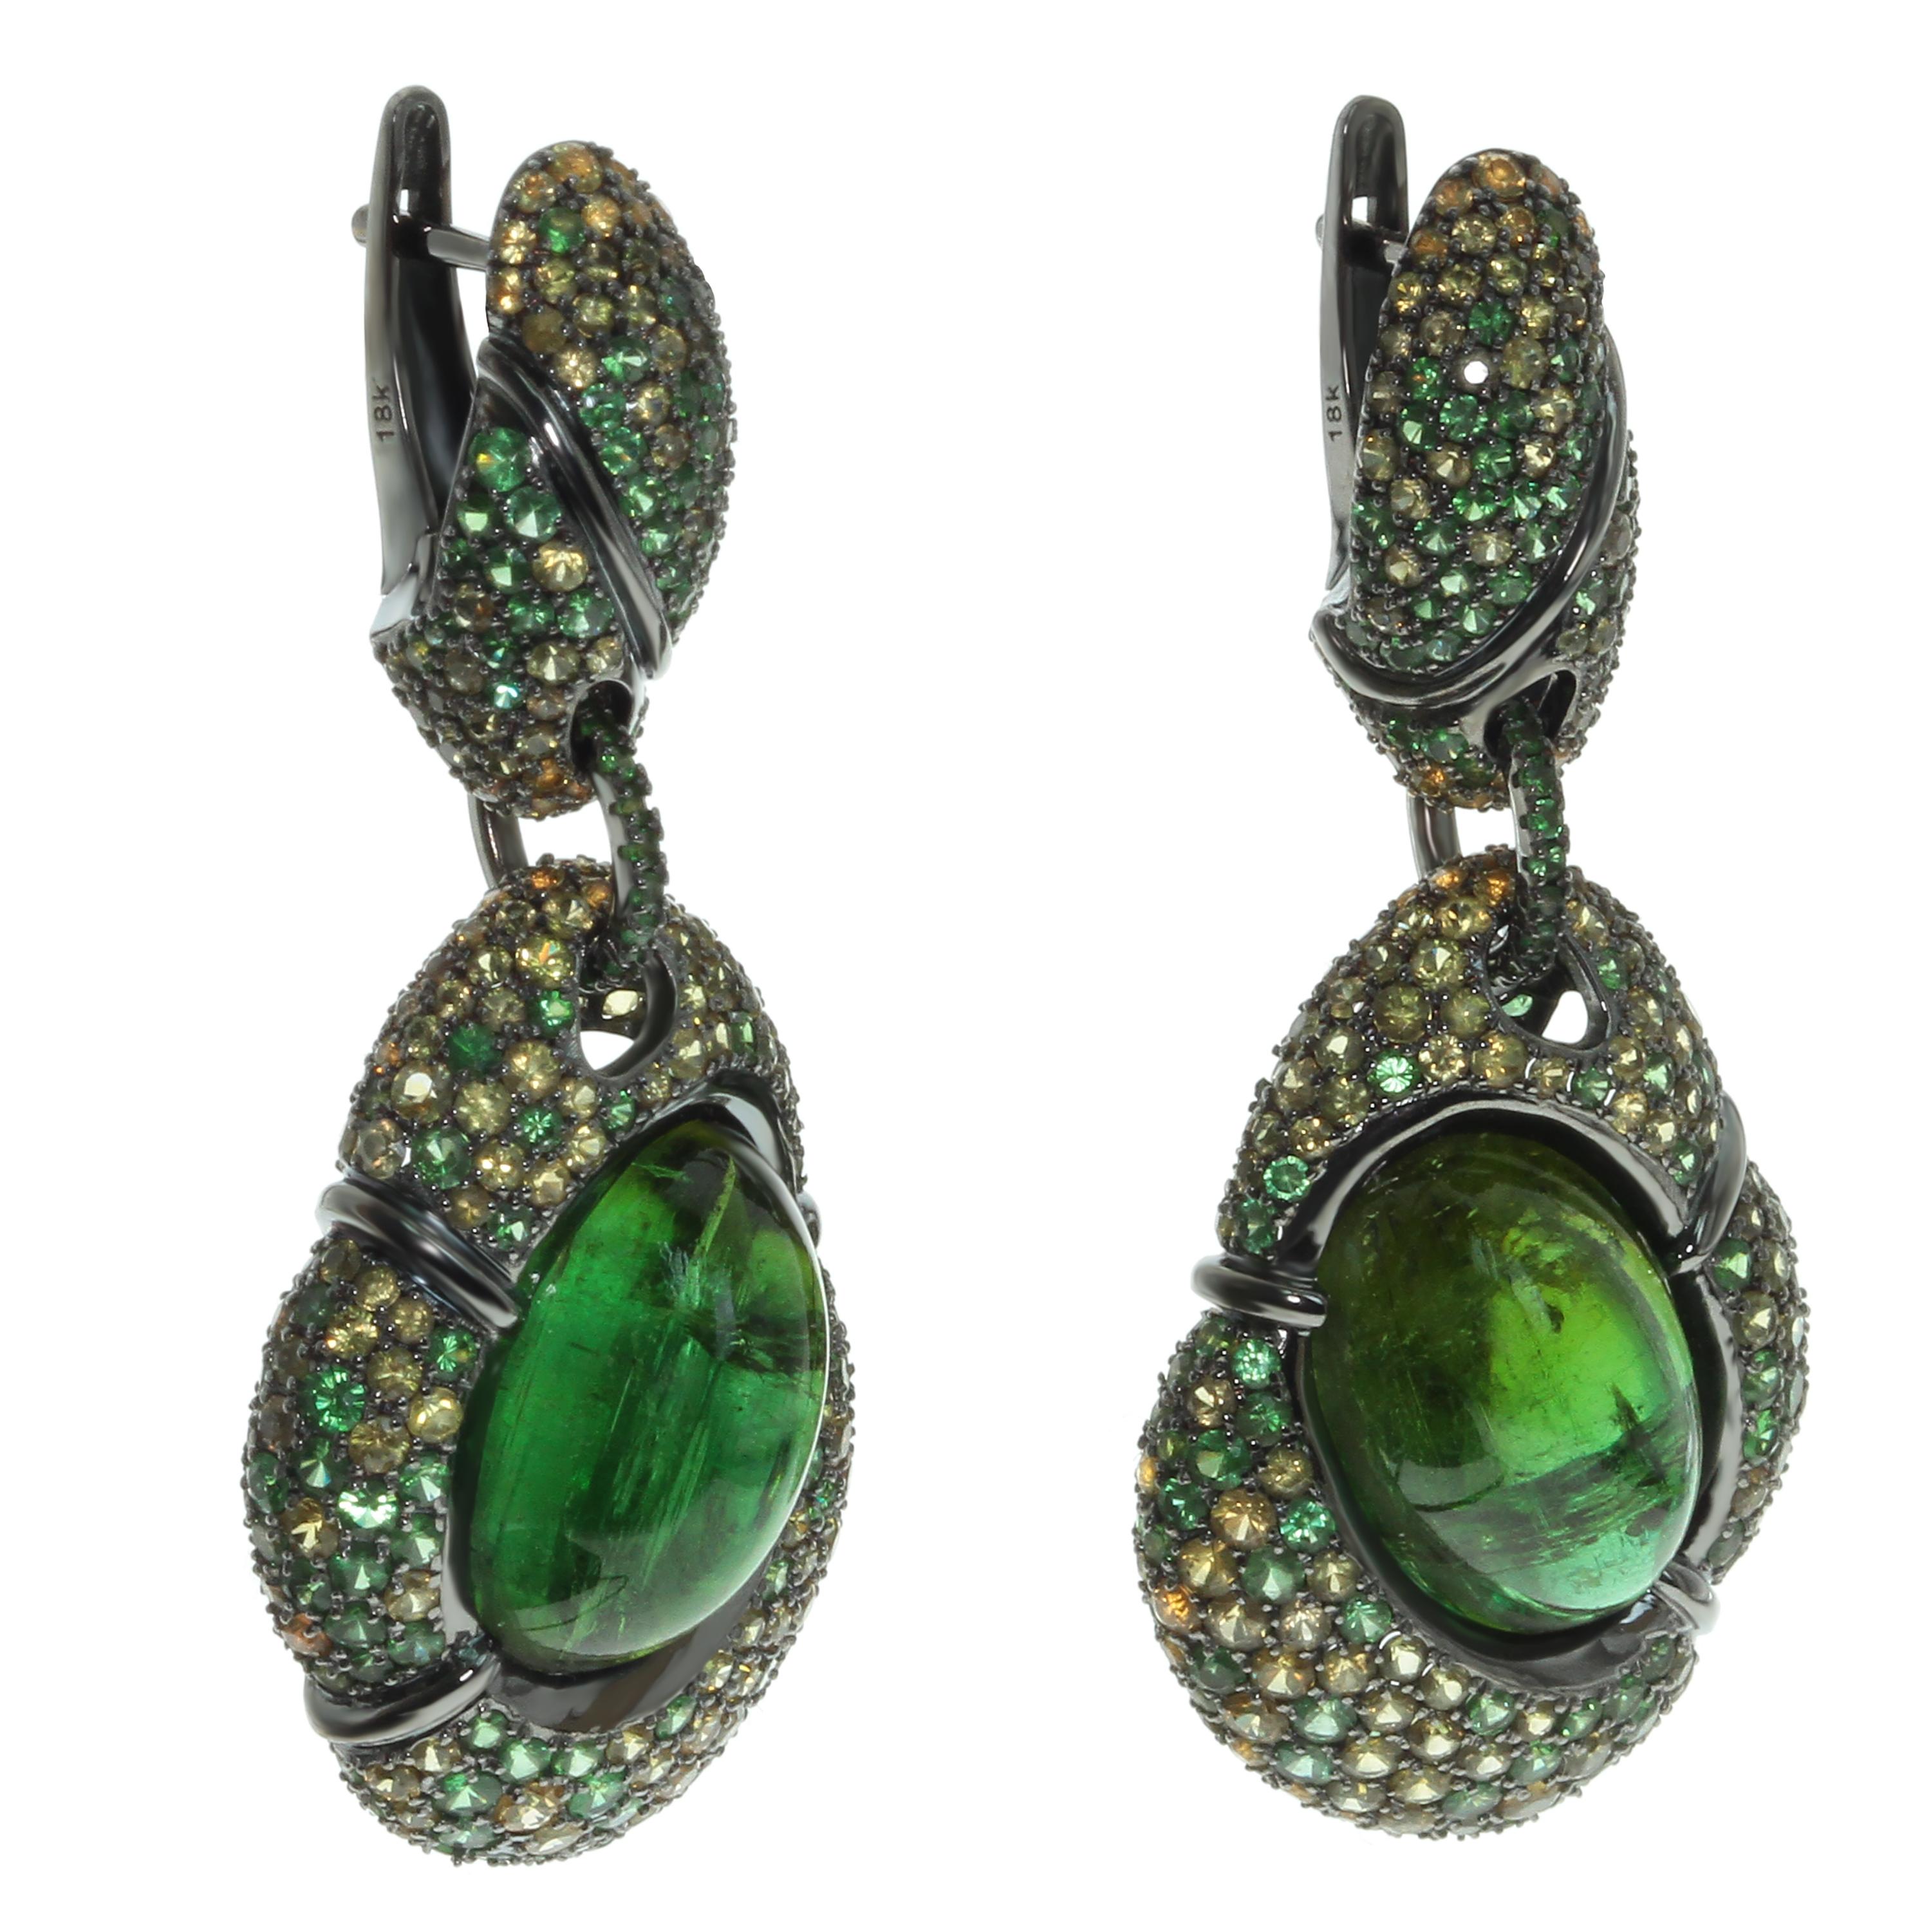 Green Tourmaline Yellow Sapphire Tsavorite 18 Karat Black Gold Earrings
Absolutely spactacular 2 Green Oval Cabochon shape Tourmalines weighing 23.50 Carat surrounded by 18K Black Gold and mix of Tsavorites and Yellow Sapphires inspires thoughts